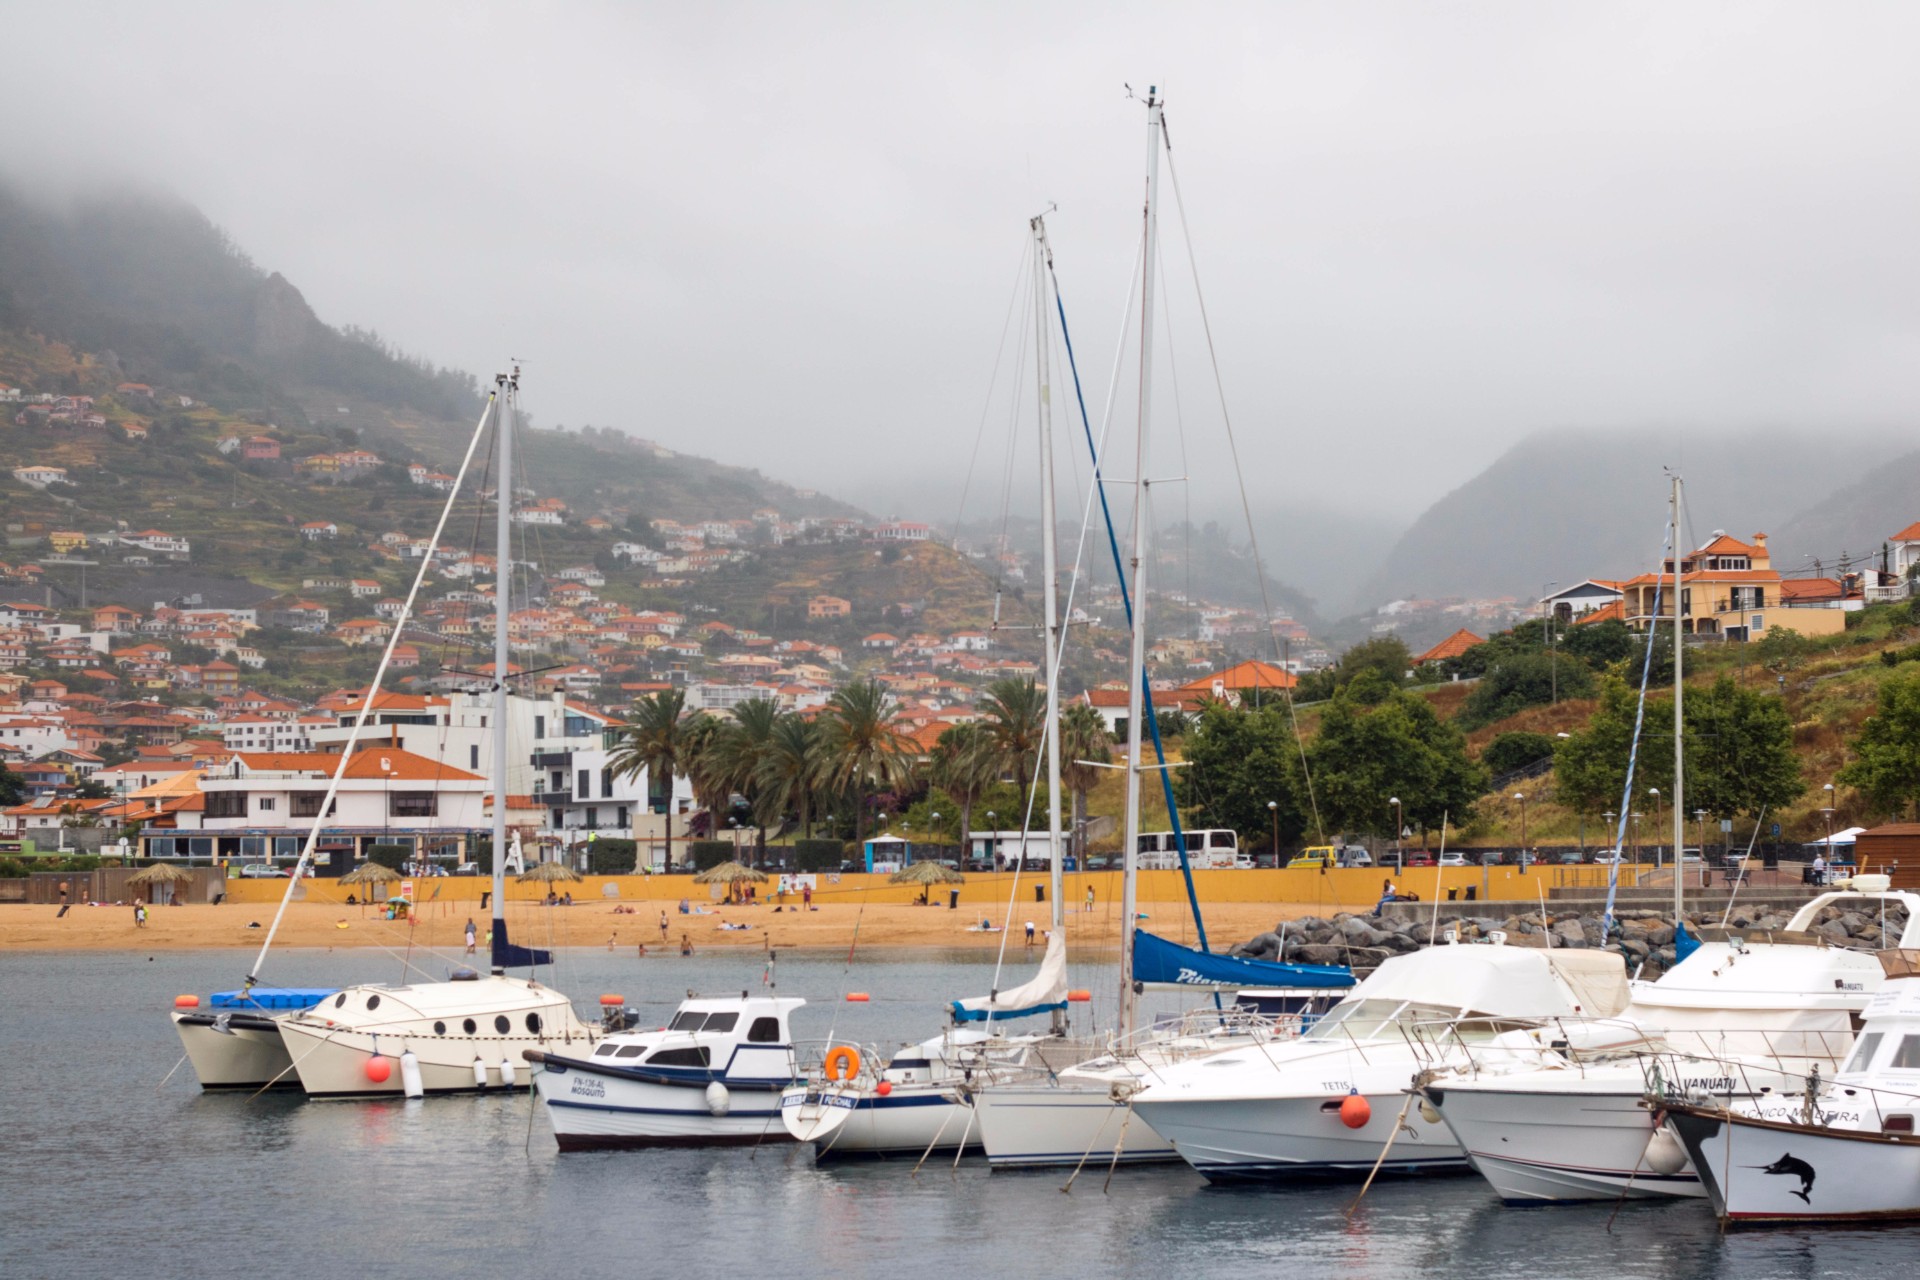 boats-on-water-by-harbour-by-machico-village-in-the-mountains-on-a-misty-day